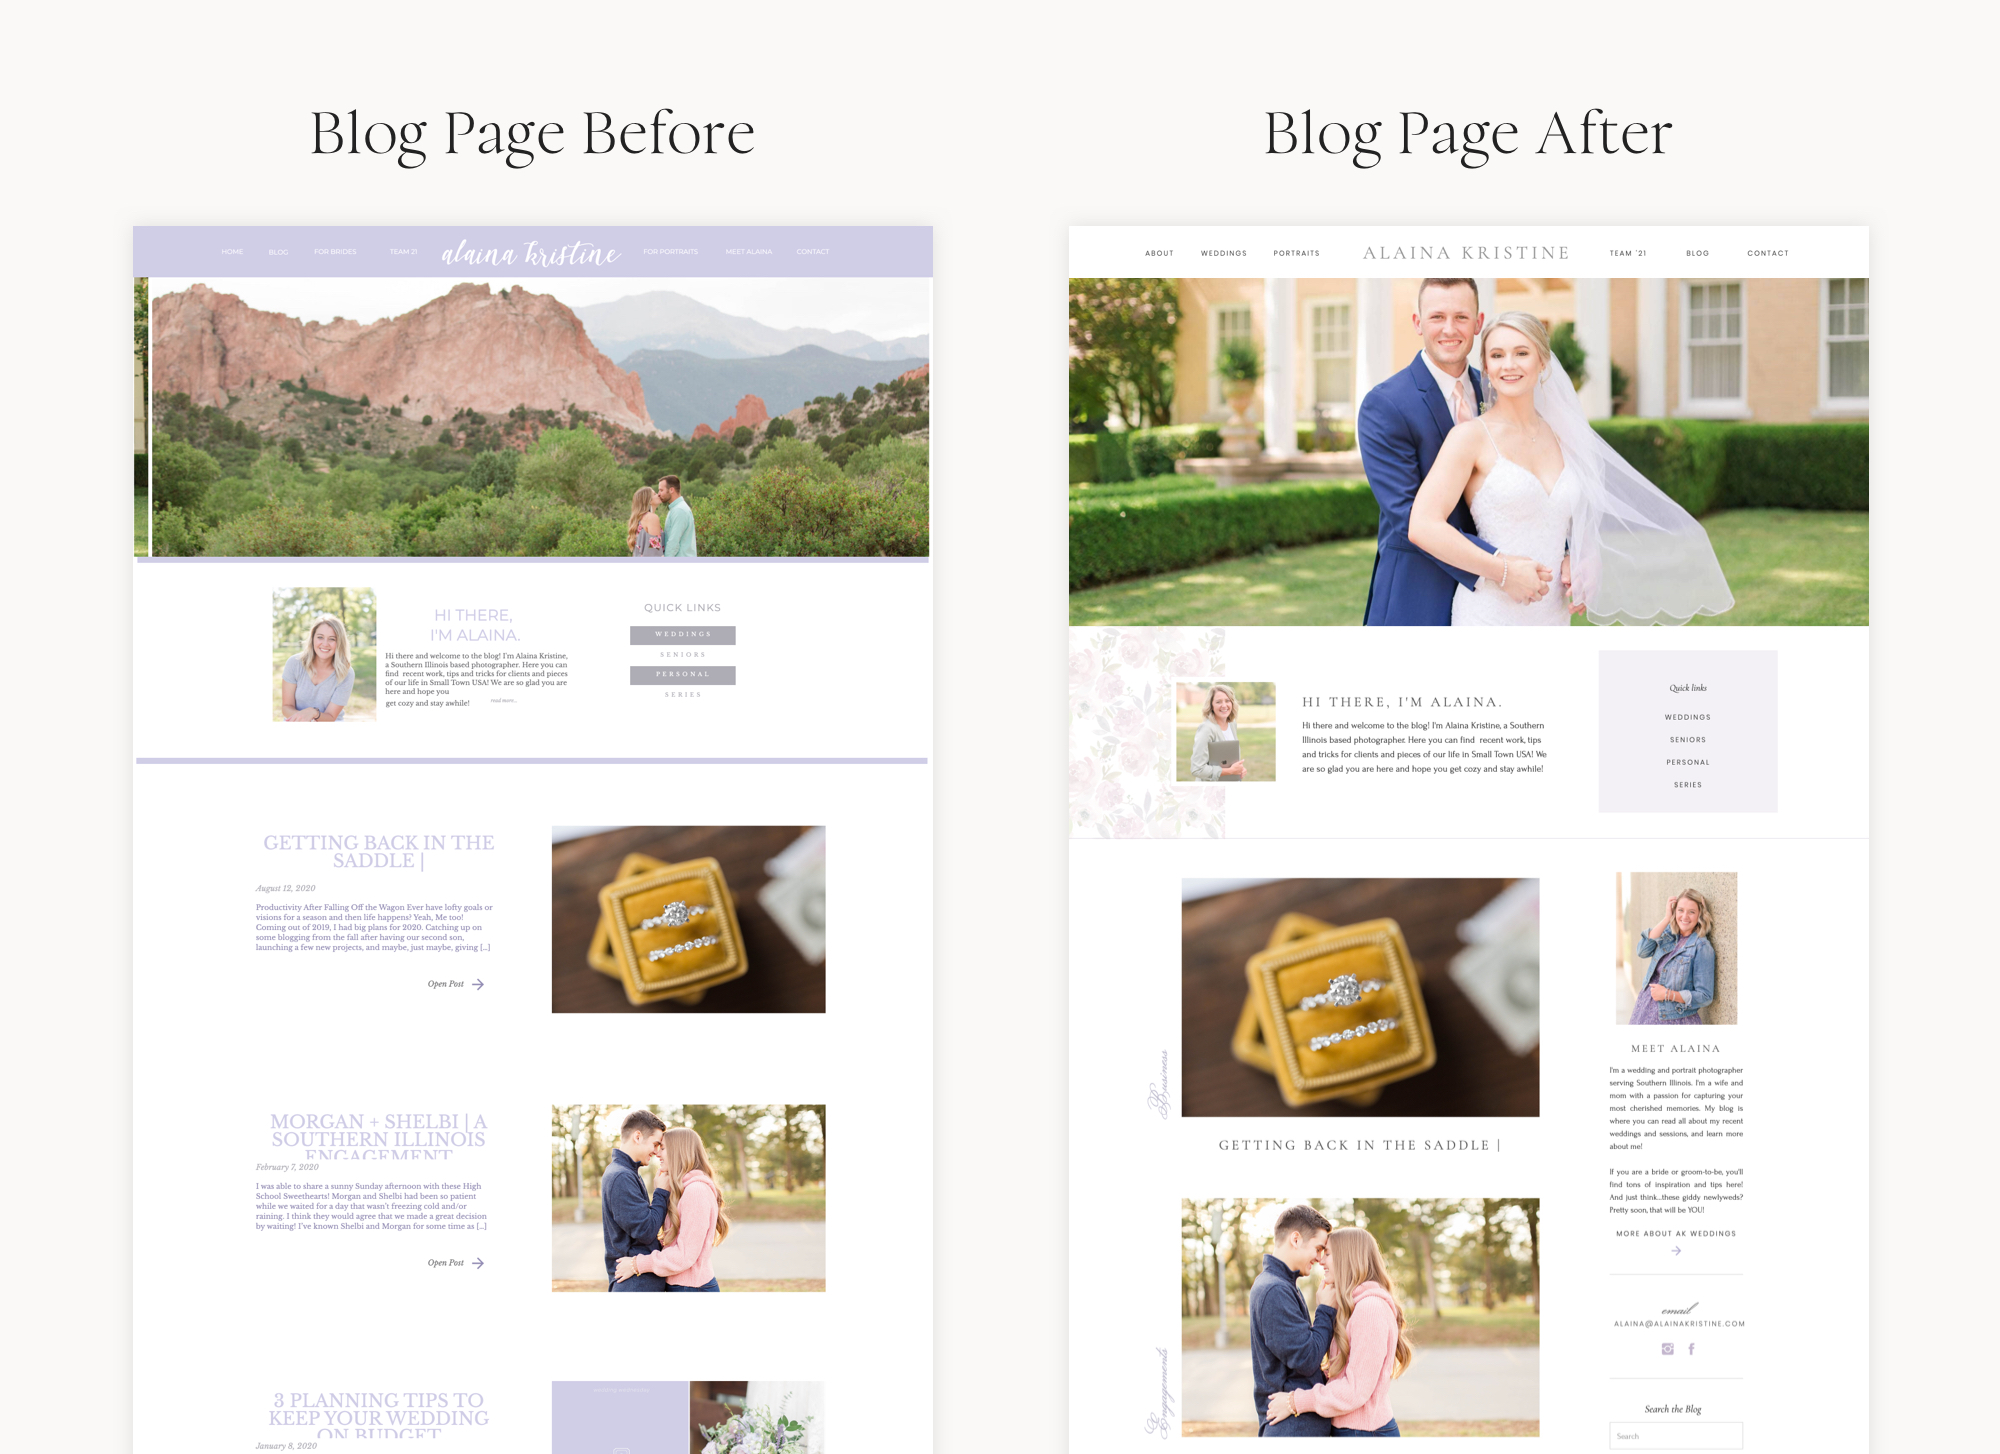 Blog page before and after